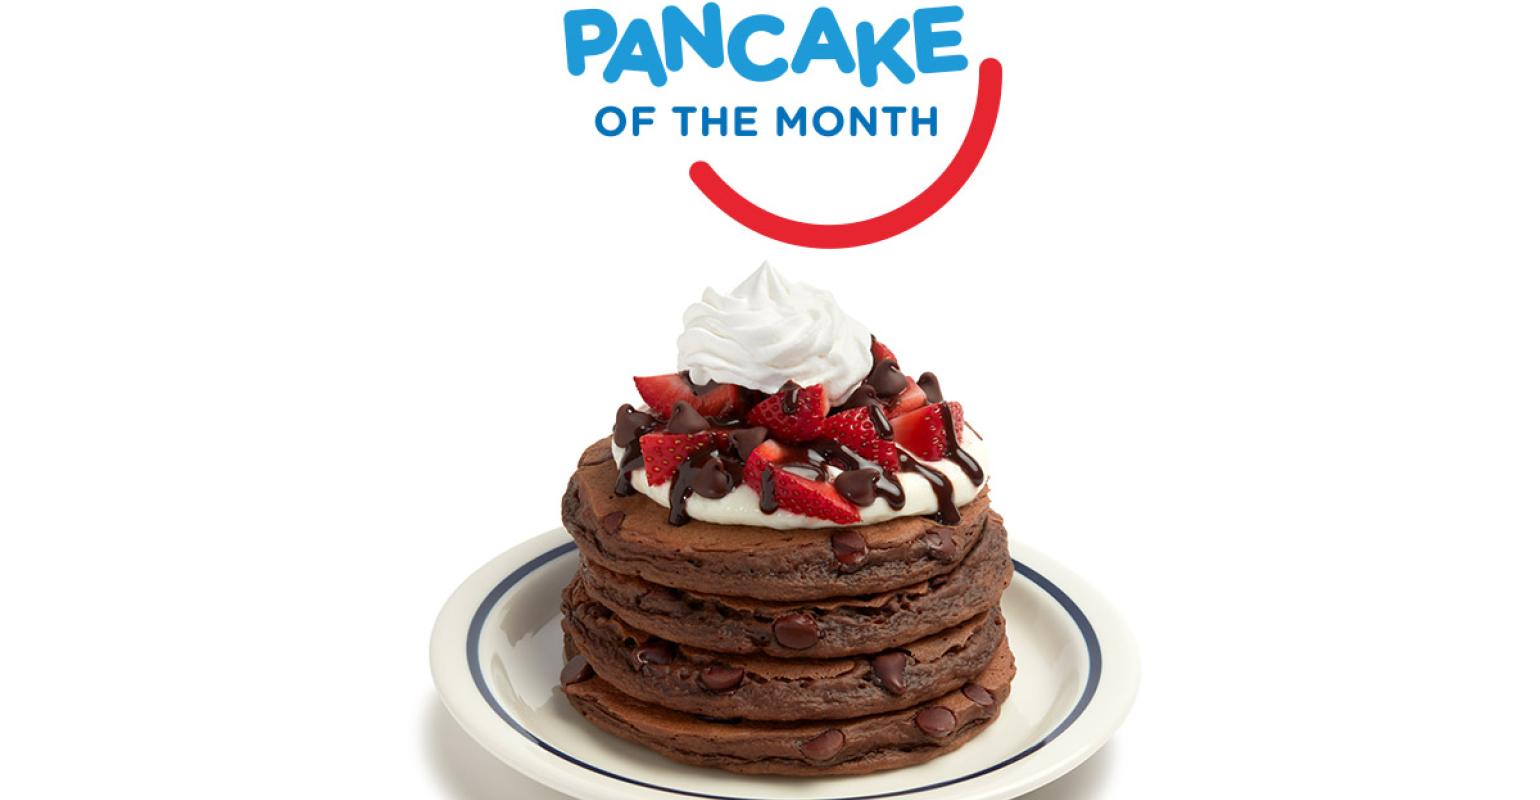 IHOP targets frequency with new Pancake of the Month promotion Nation